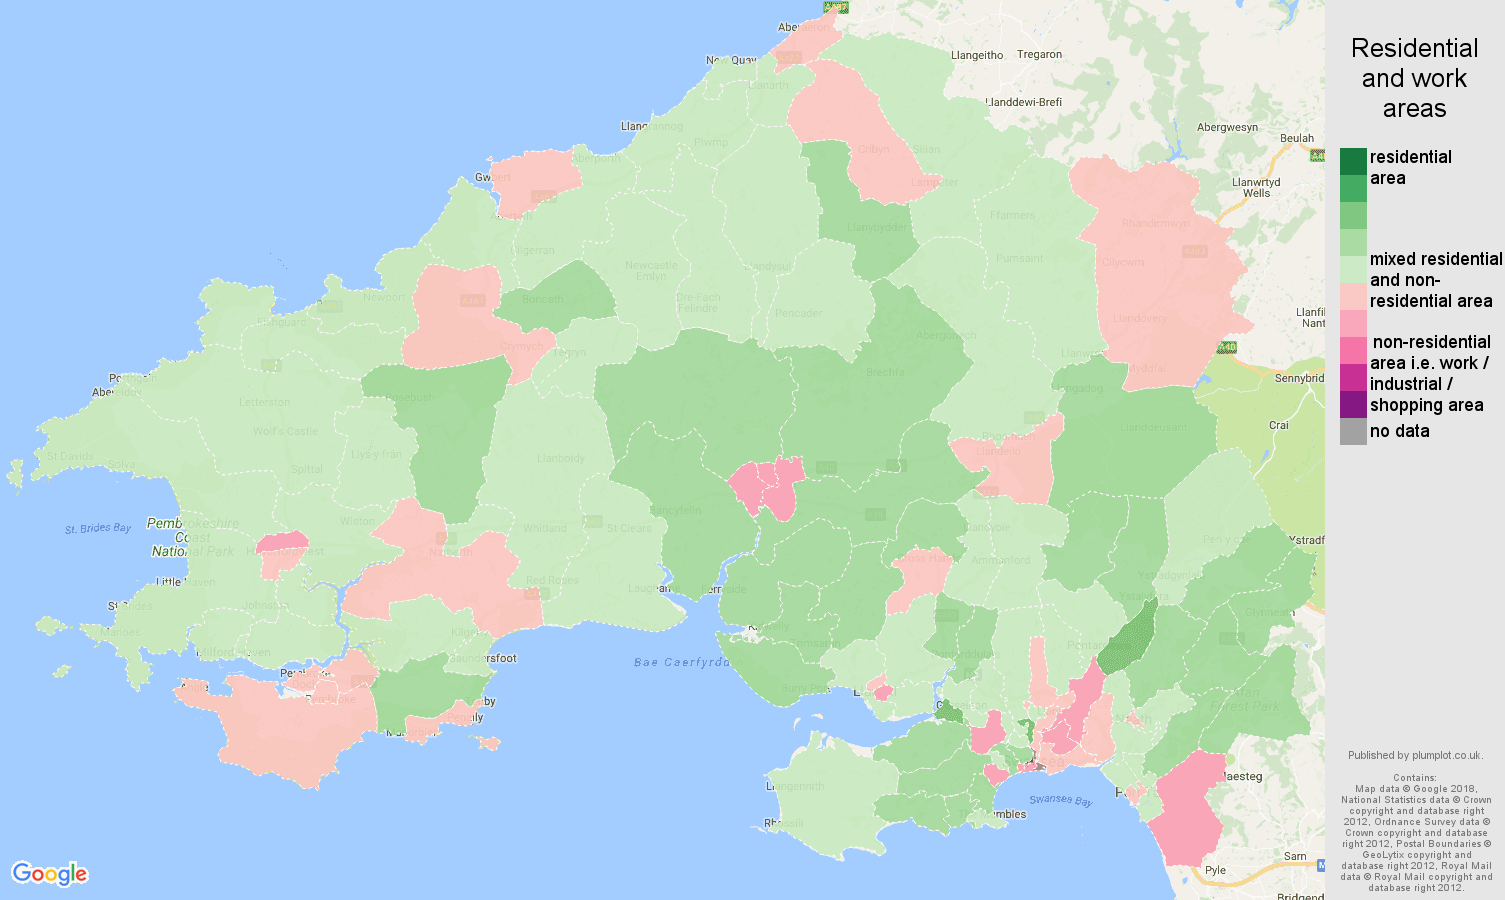 Swansea residential areas map